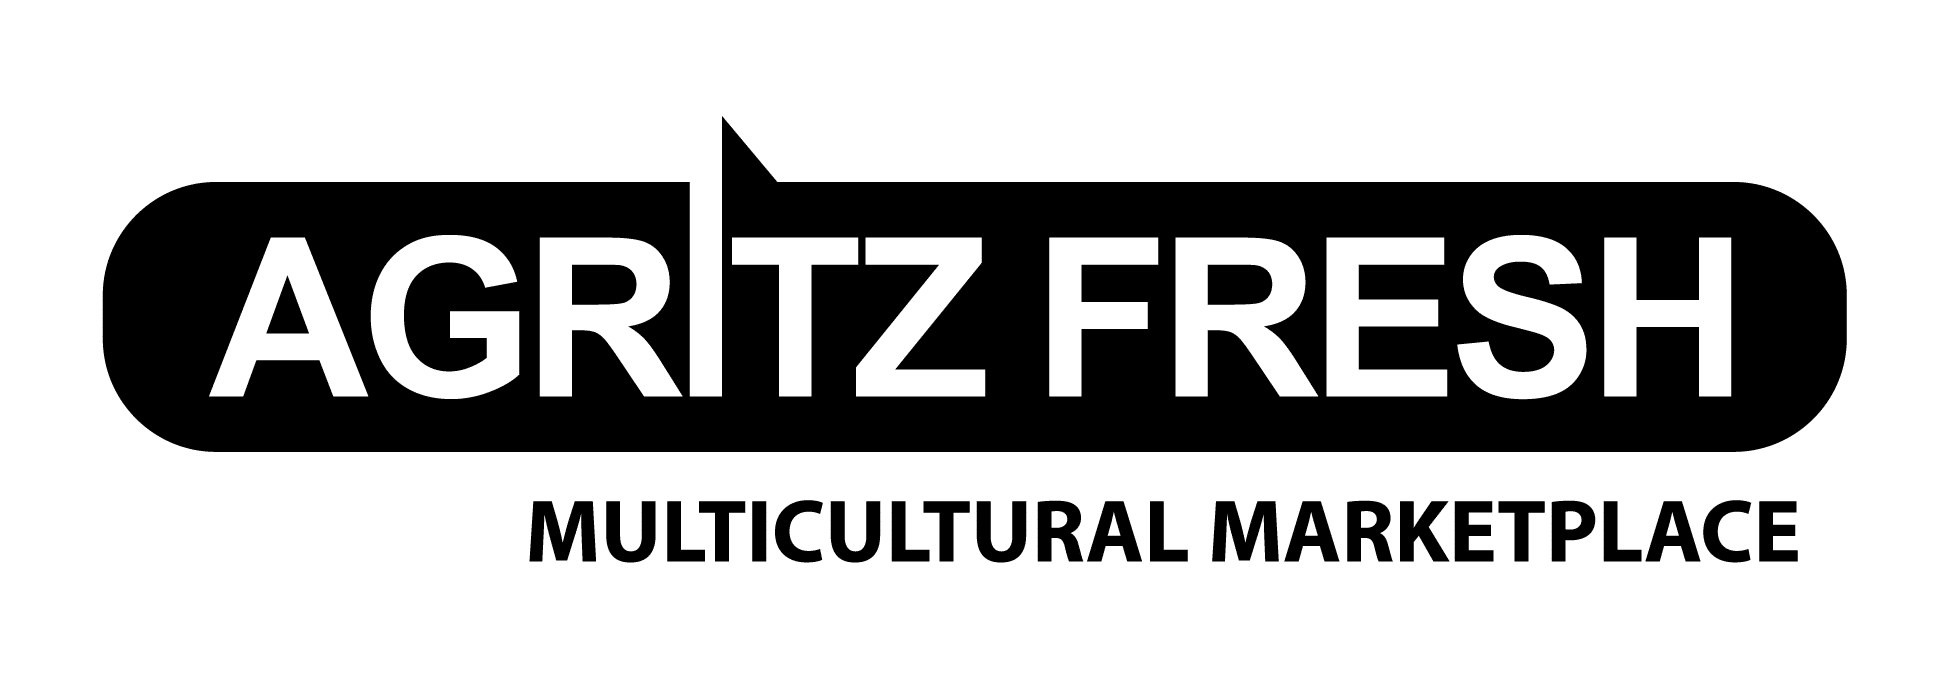 Agritz Fresh: Empowering Local Businesses and Fostering Global Connections